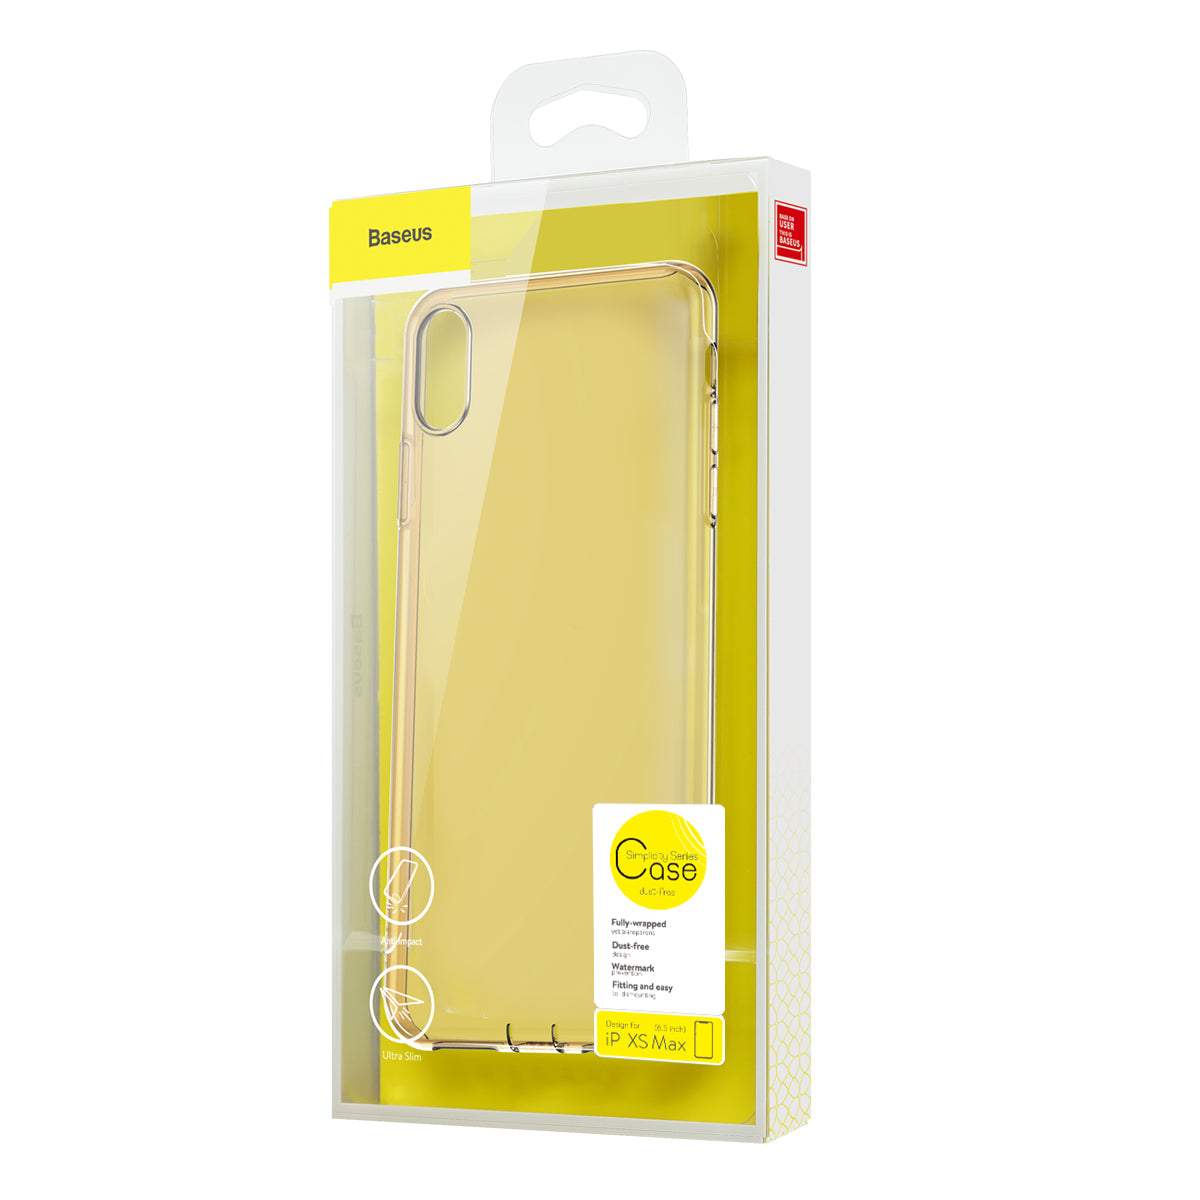 iPhone-XS-Max-Baseus-Simple-Case-Transparent-Gold-Packaging_S07YGL9E8FYV.jpg